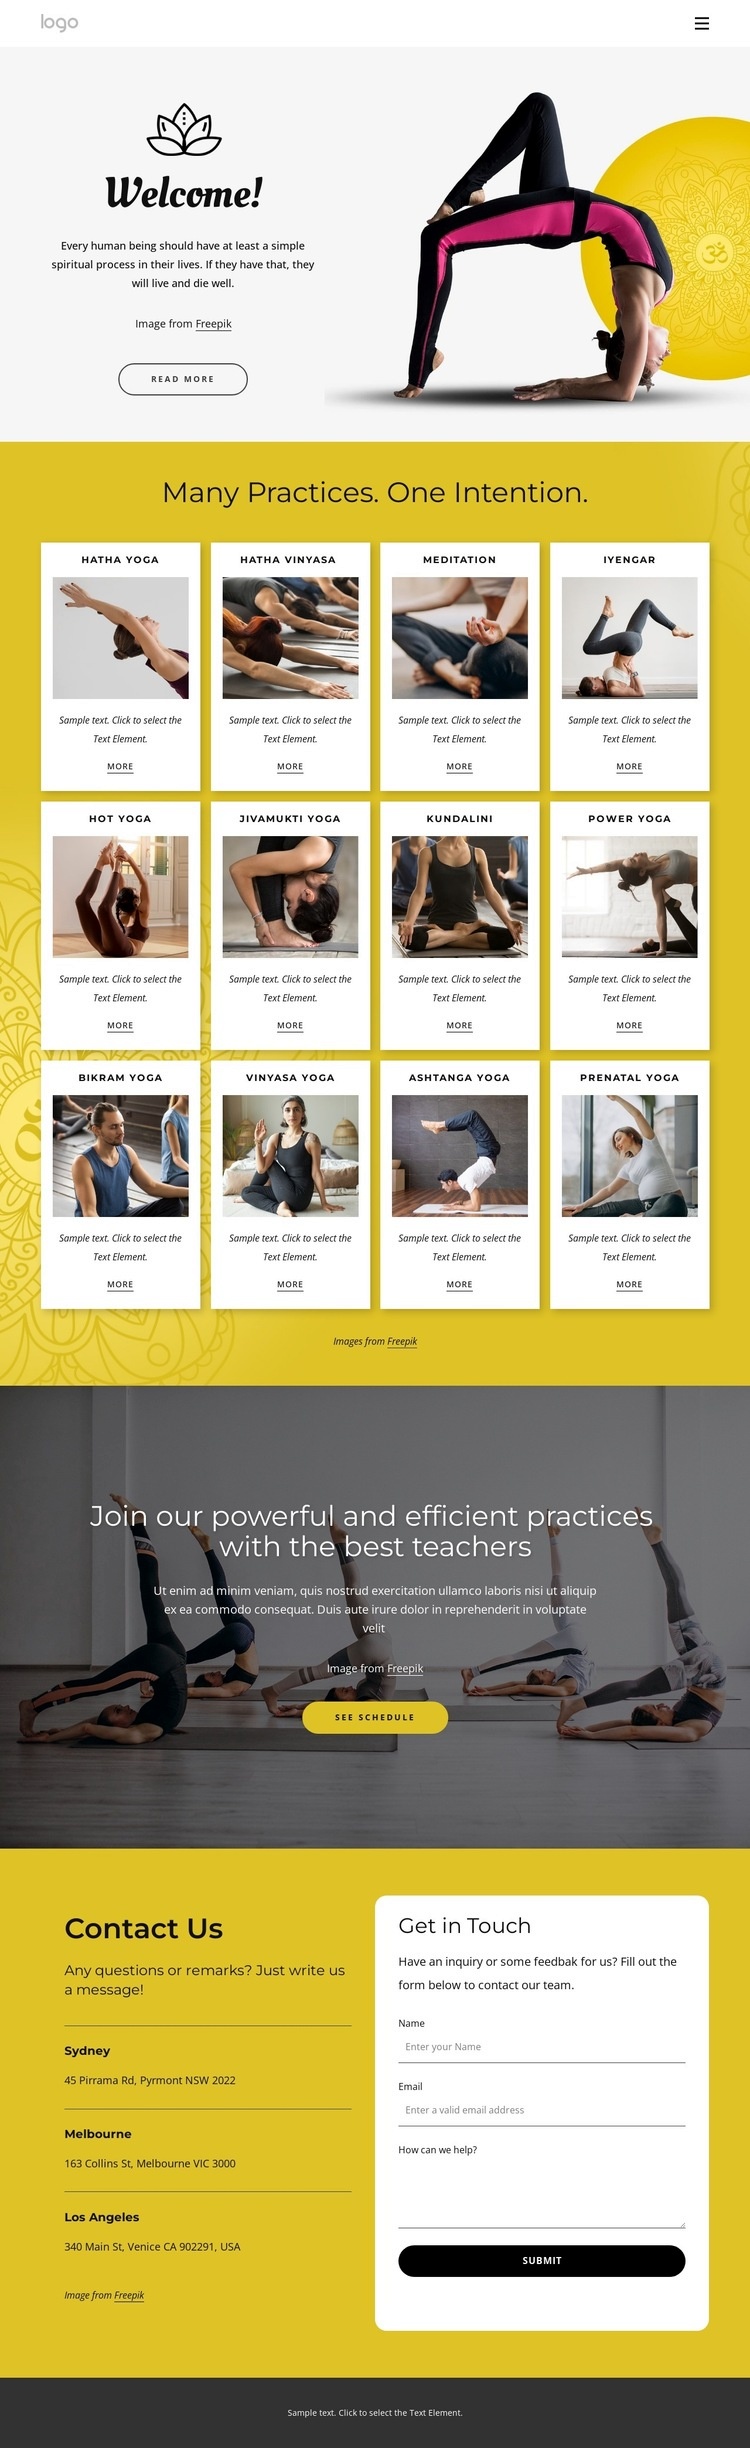 Powerful yoga practices Web Page Design